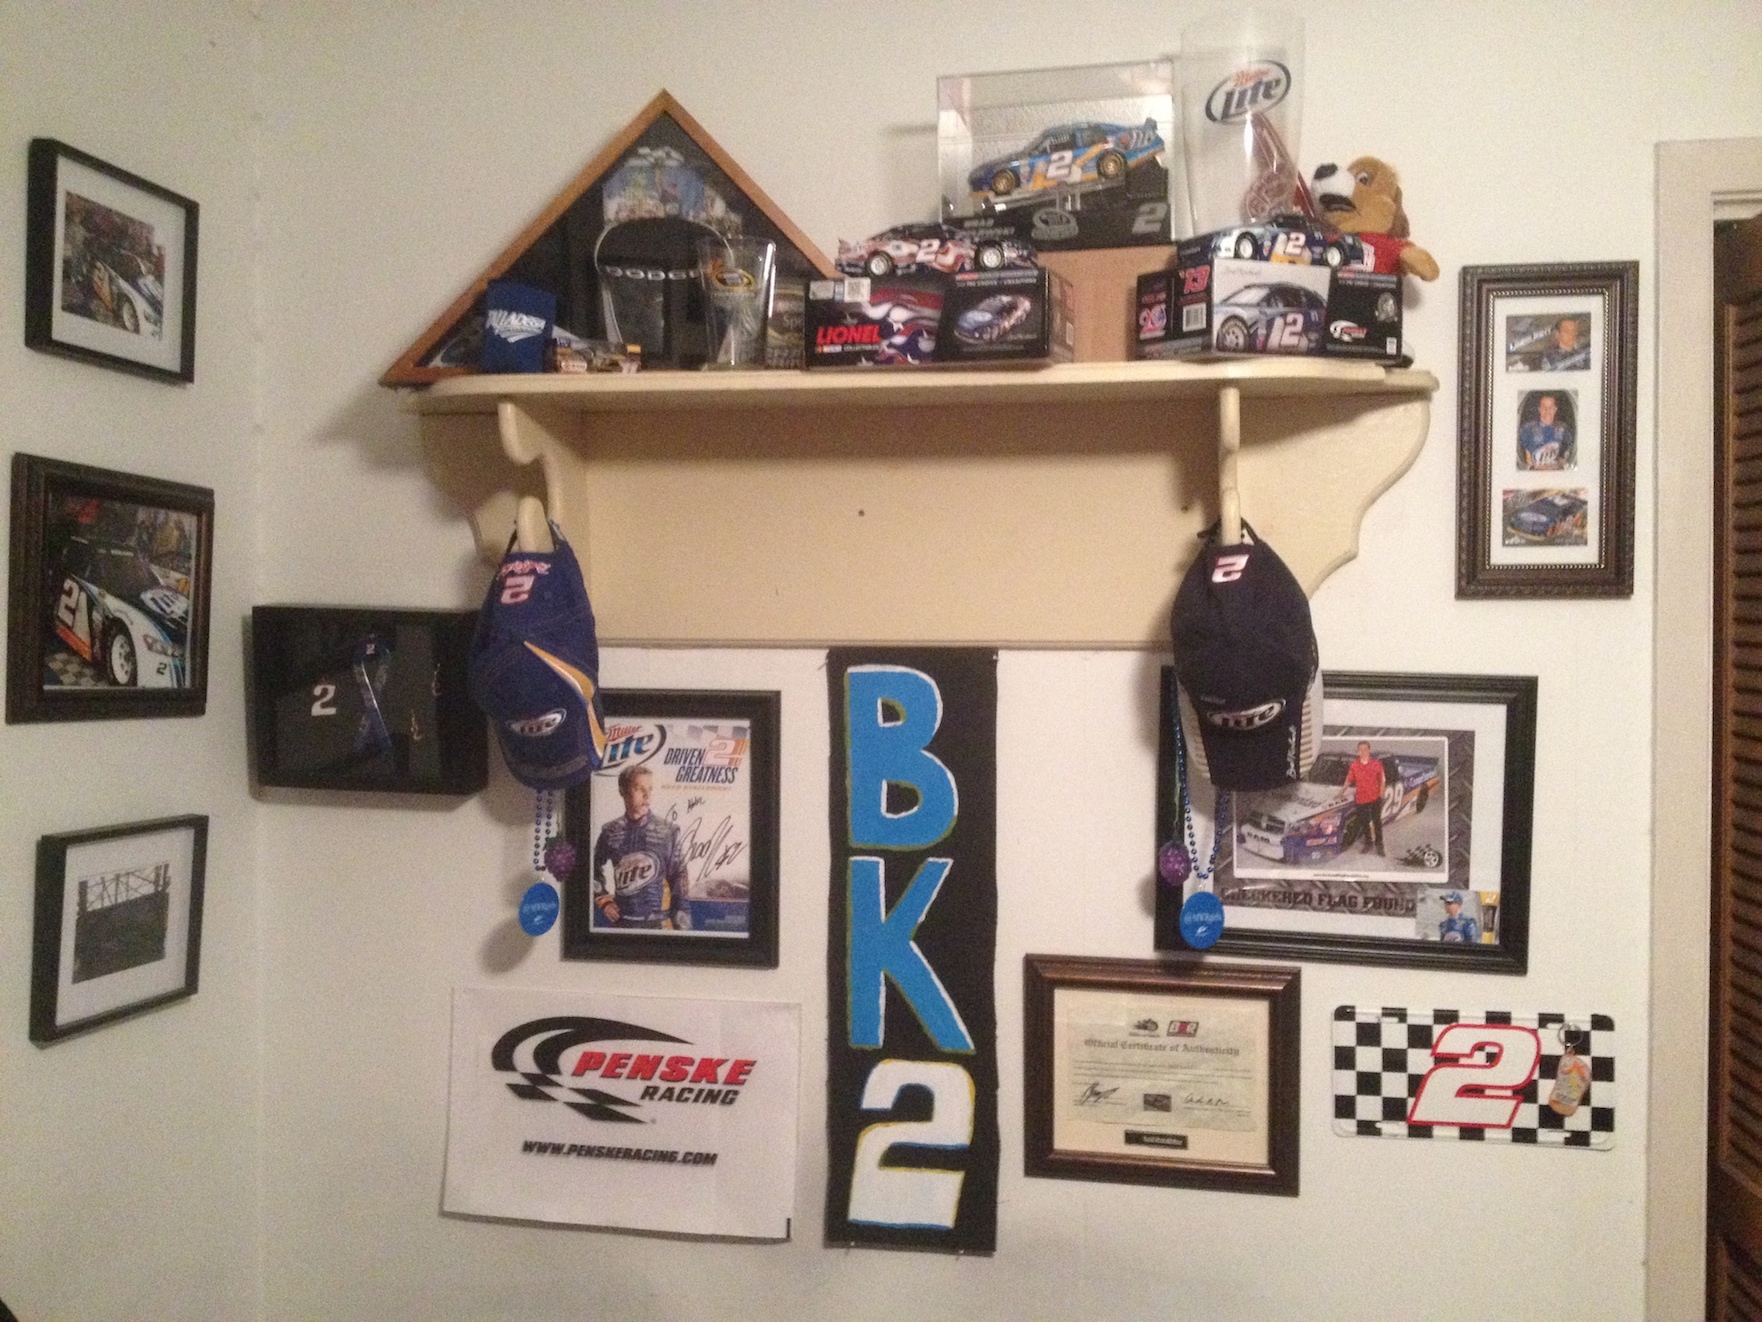 One of my BK Walls. I need more shelves!